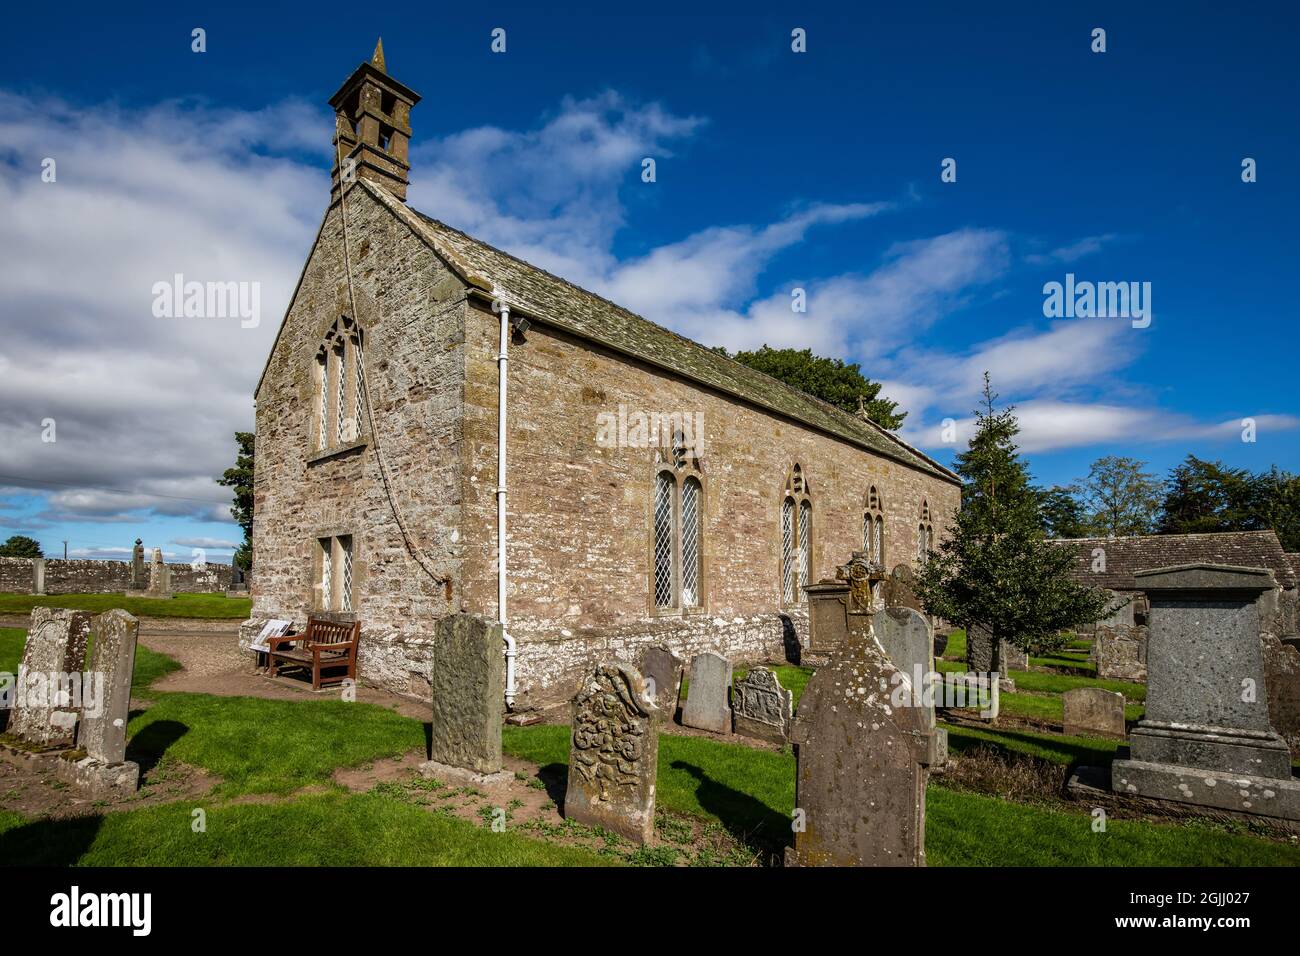 The Kirk of Aberlemno, where the Cross Slab is situated, one of the Aberlemno Standing Stones in Angus, Scotland Stock Photo